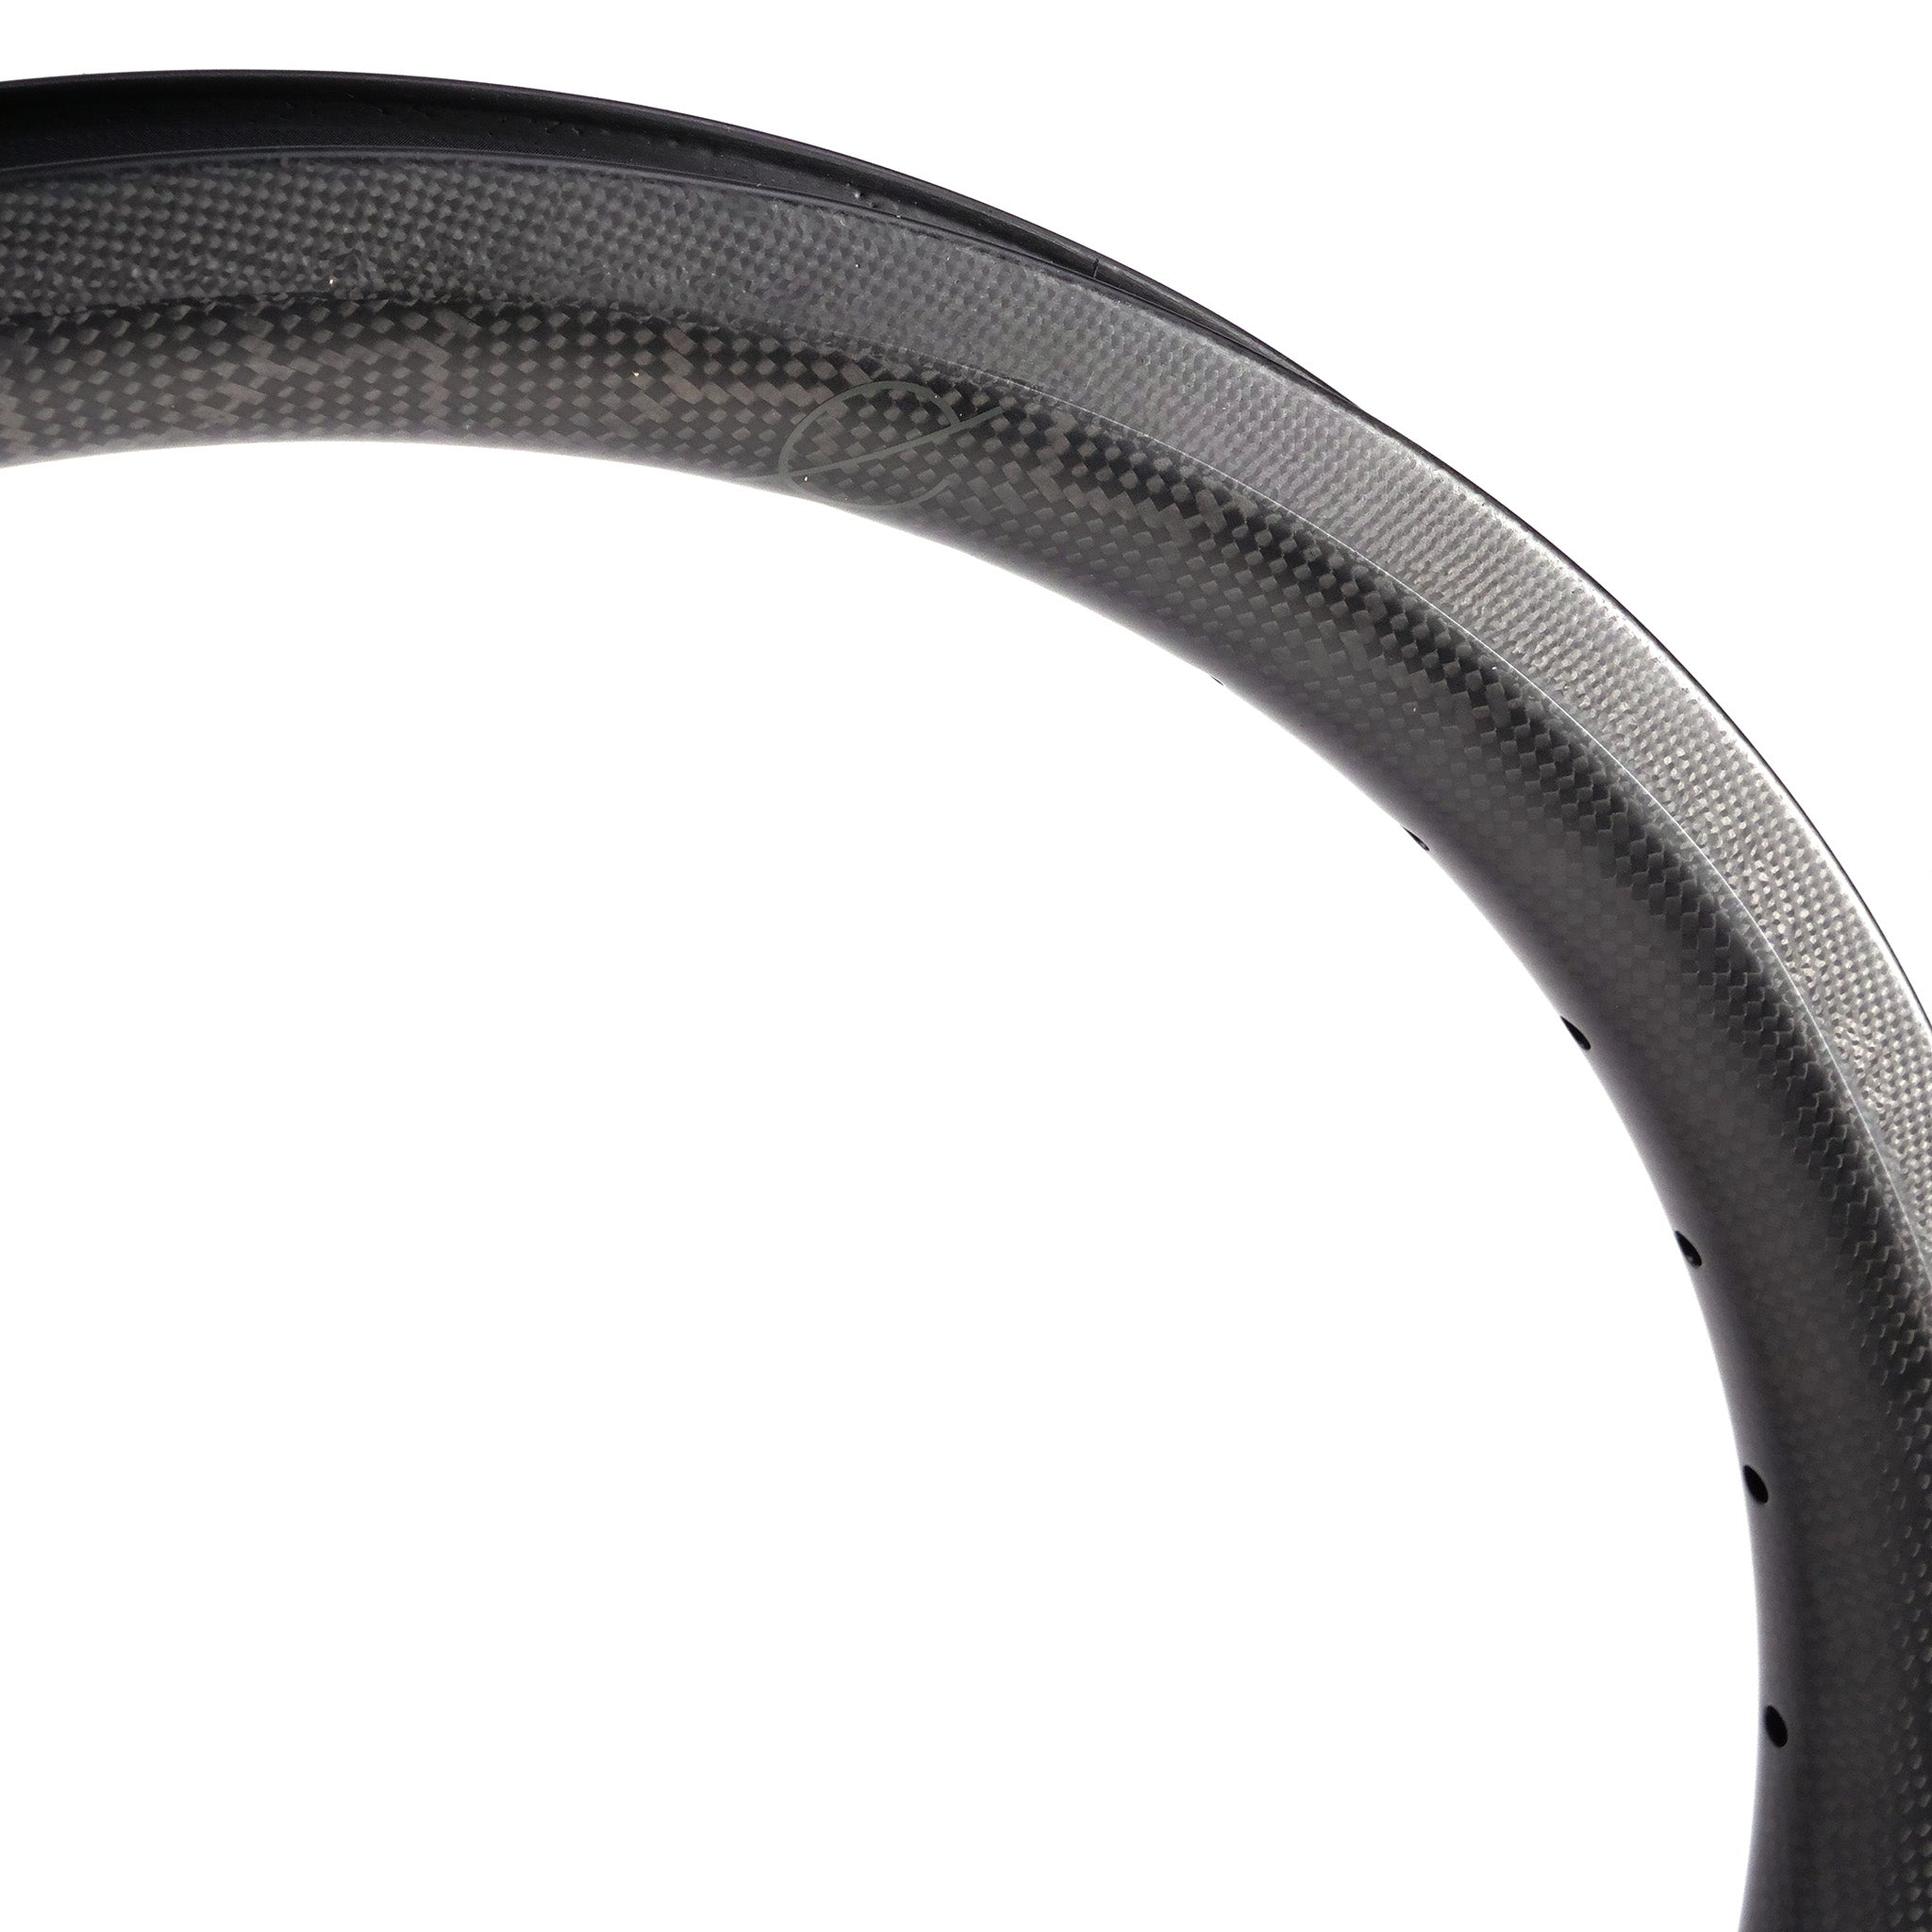 Close-up of a section of a Spectre V2 Carbon Fibre 20 Inch Brake Rim with visible texture and curvature, featuring 4D drilled holes.